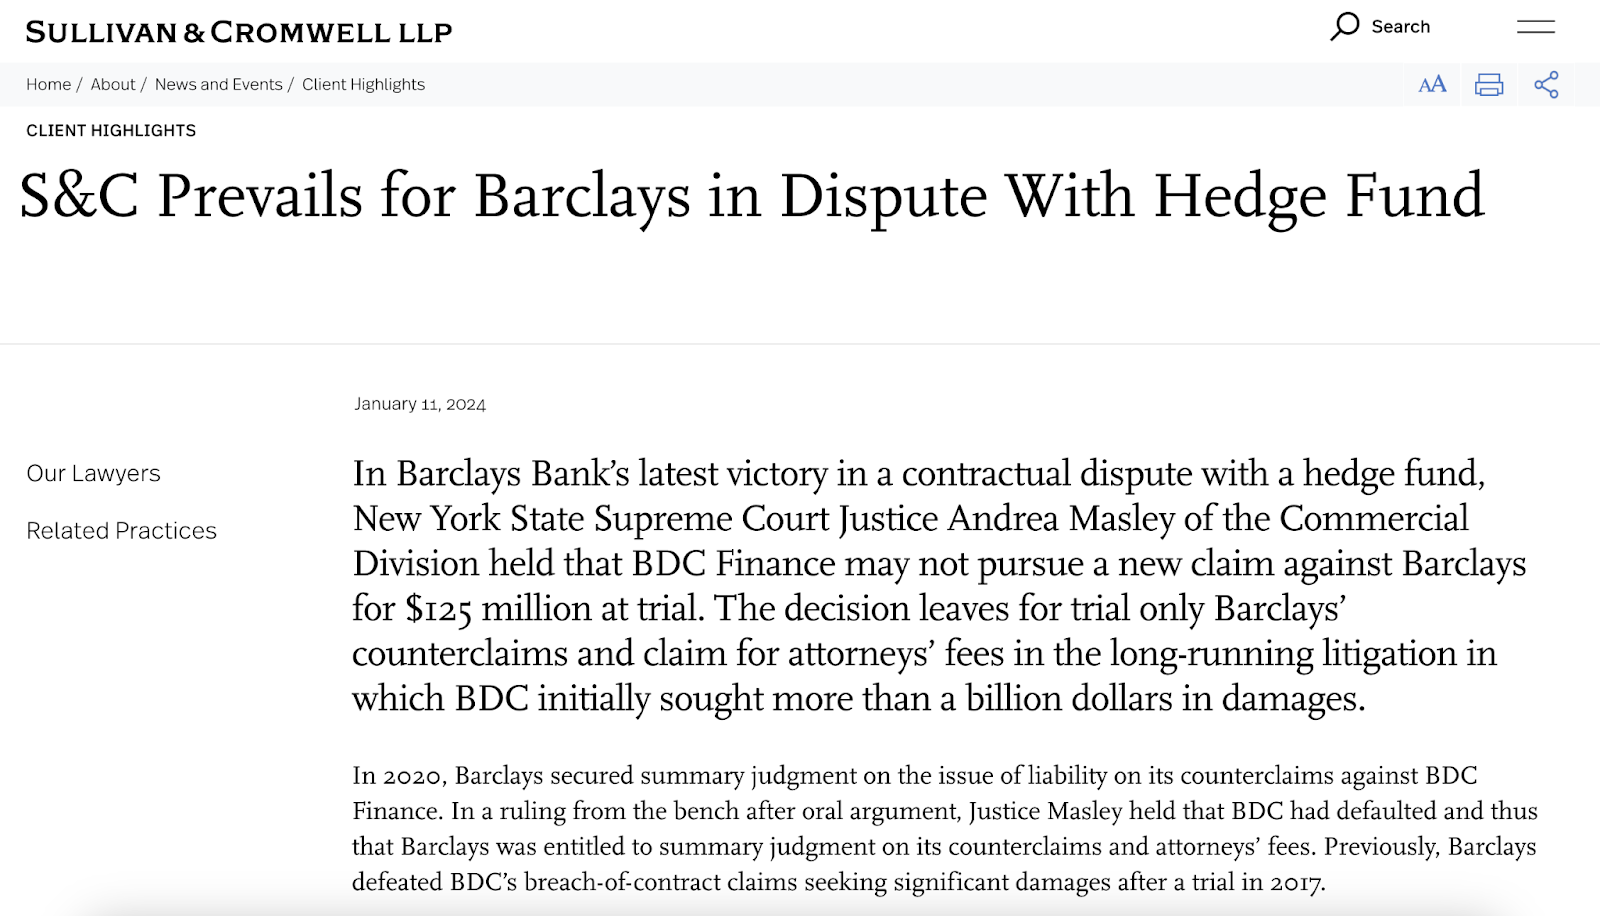 A lawsuit  survey  that reads "S&C Prevails for Barclays successful  Dispute With Hedge Fund"